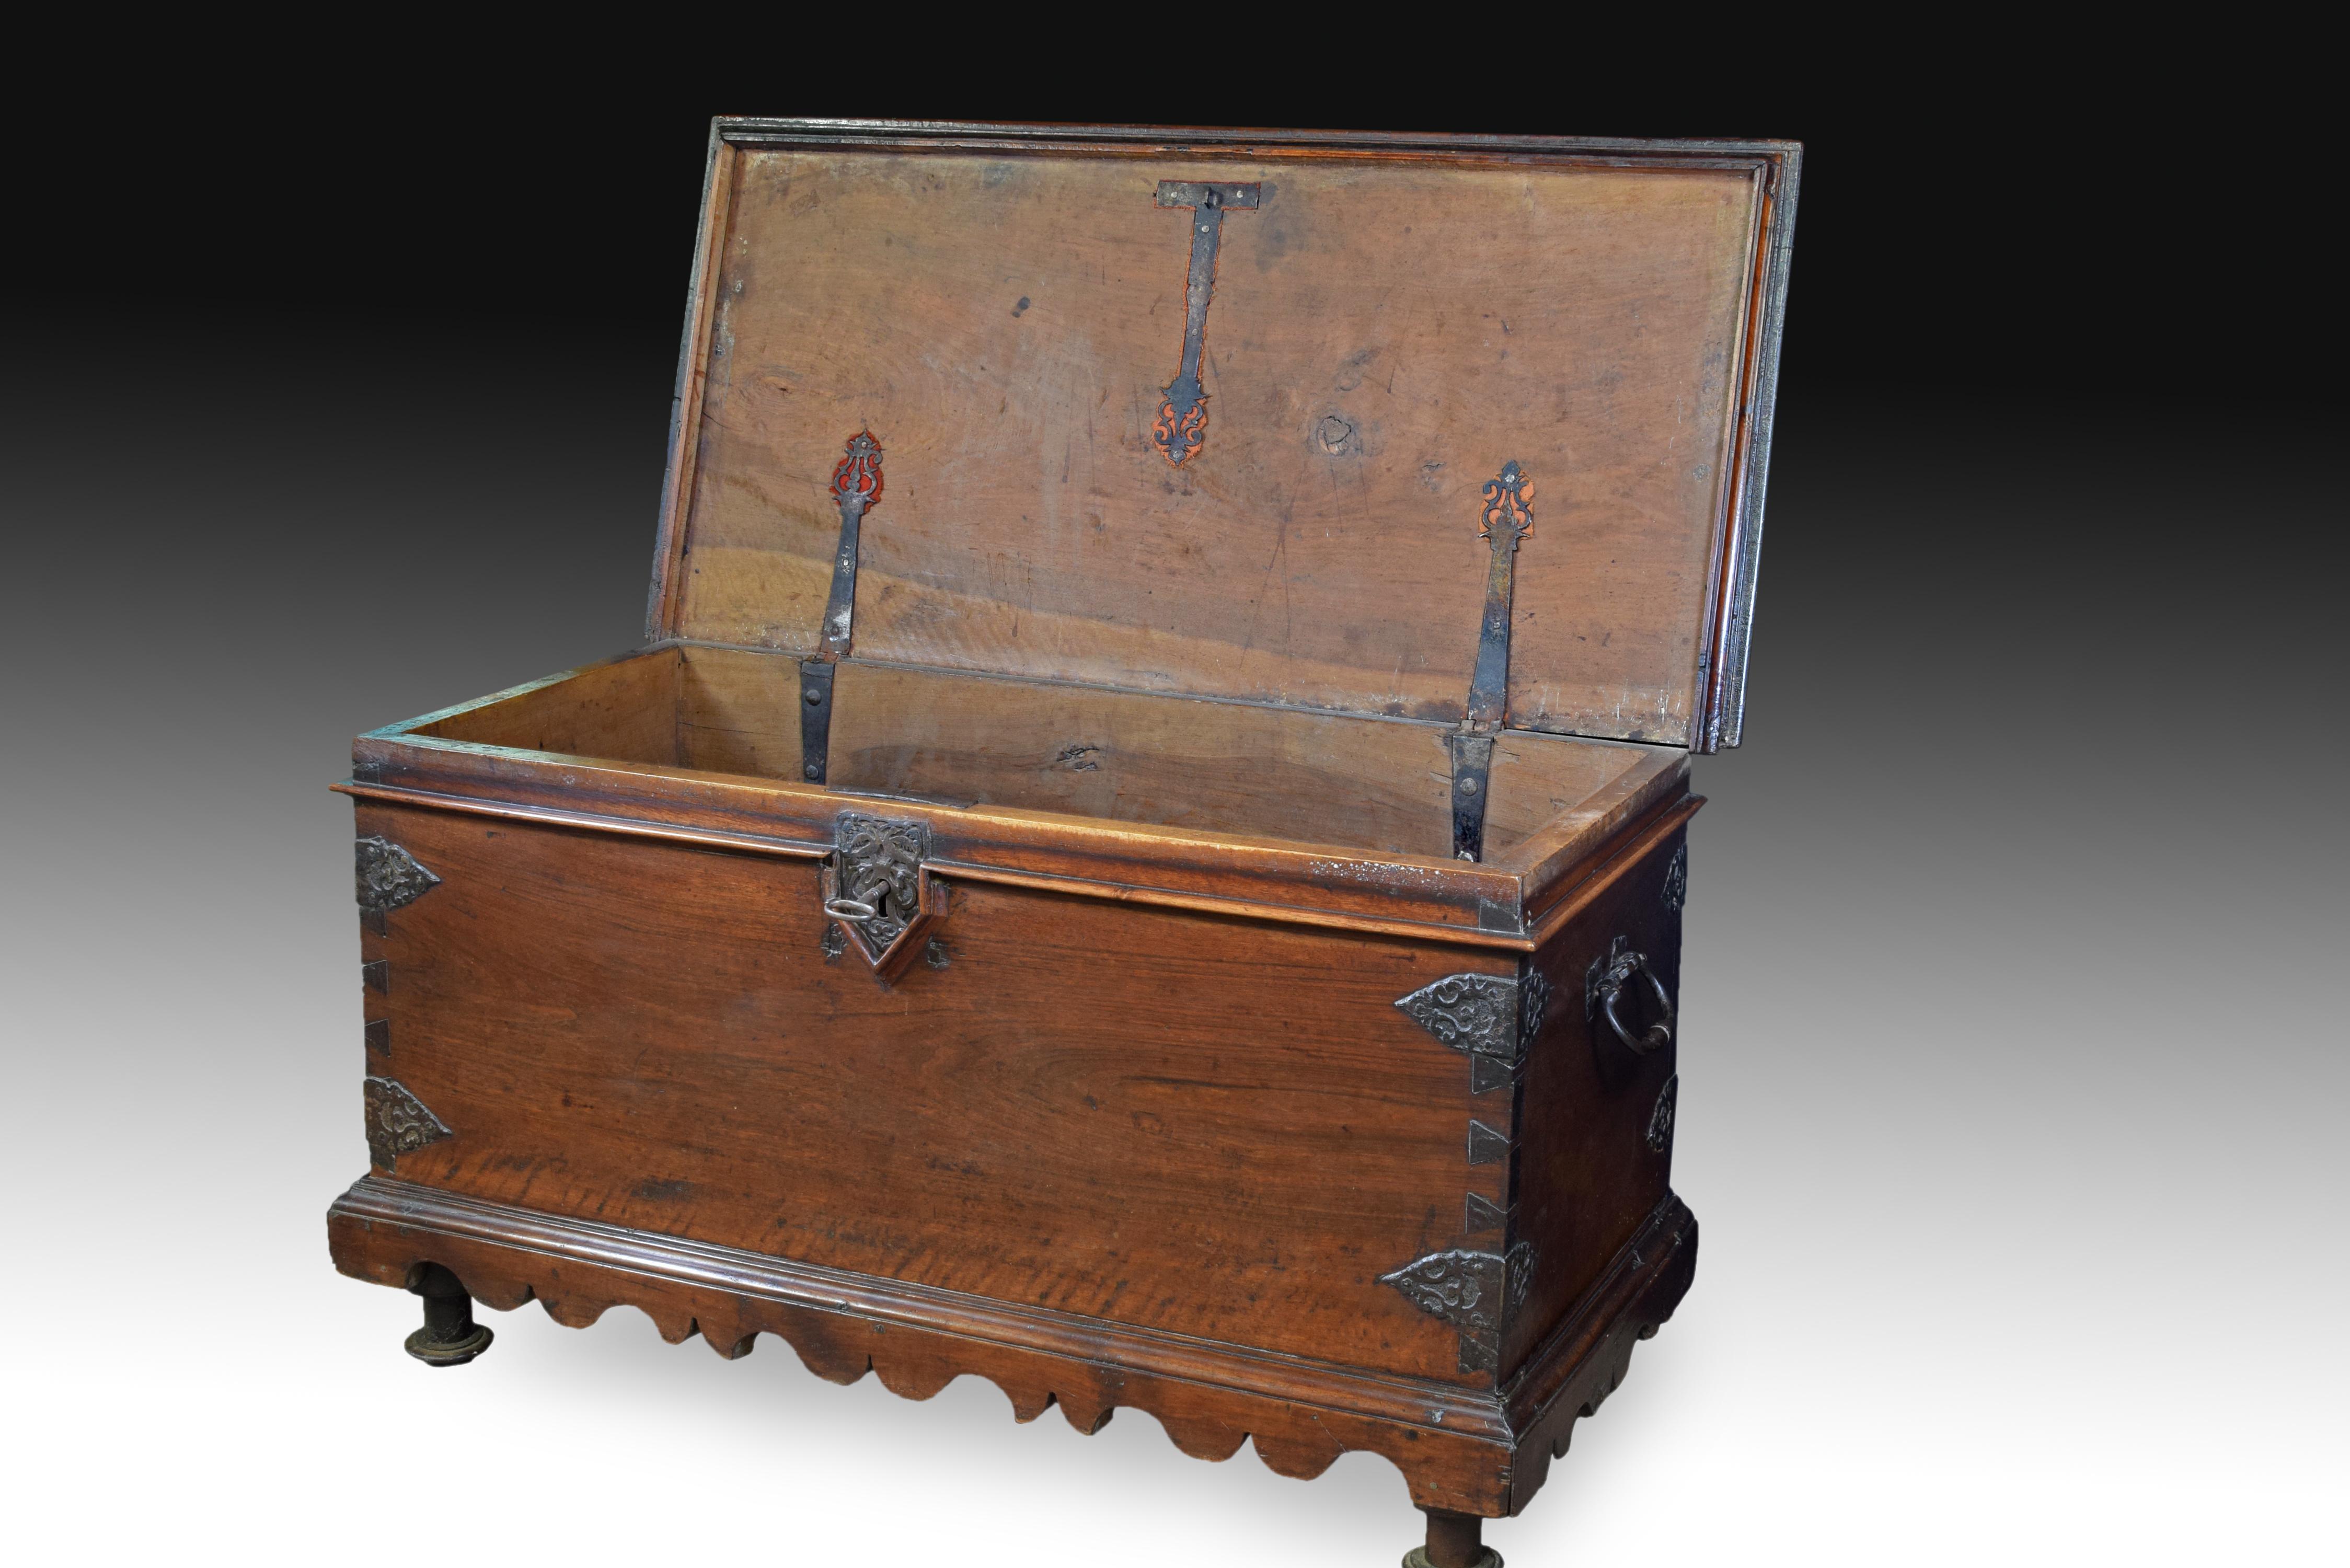 Spanish Chest, Walnut, Textile, Wrought Iron, 17th Century For Sale